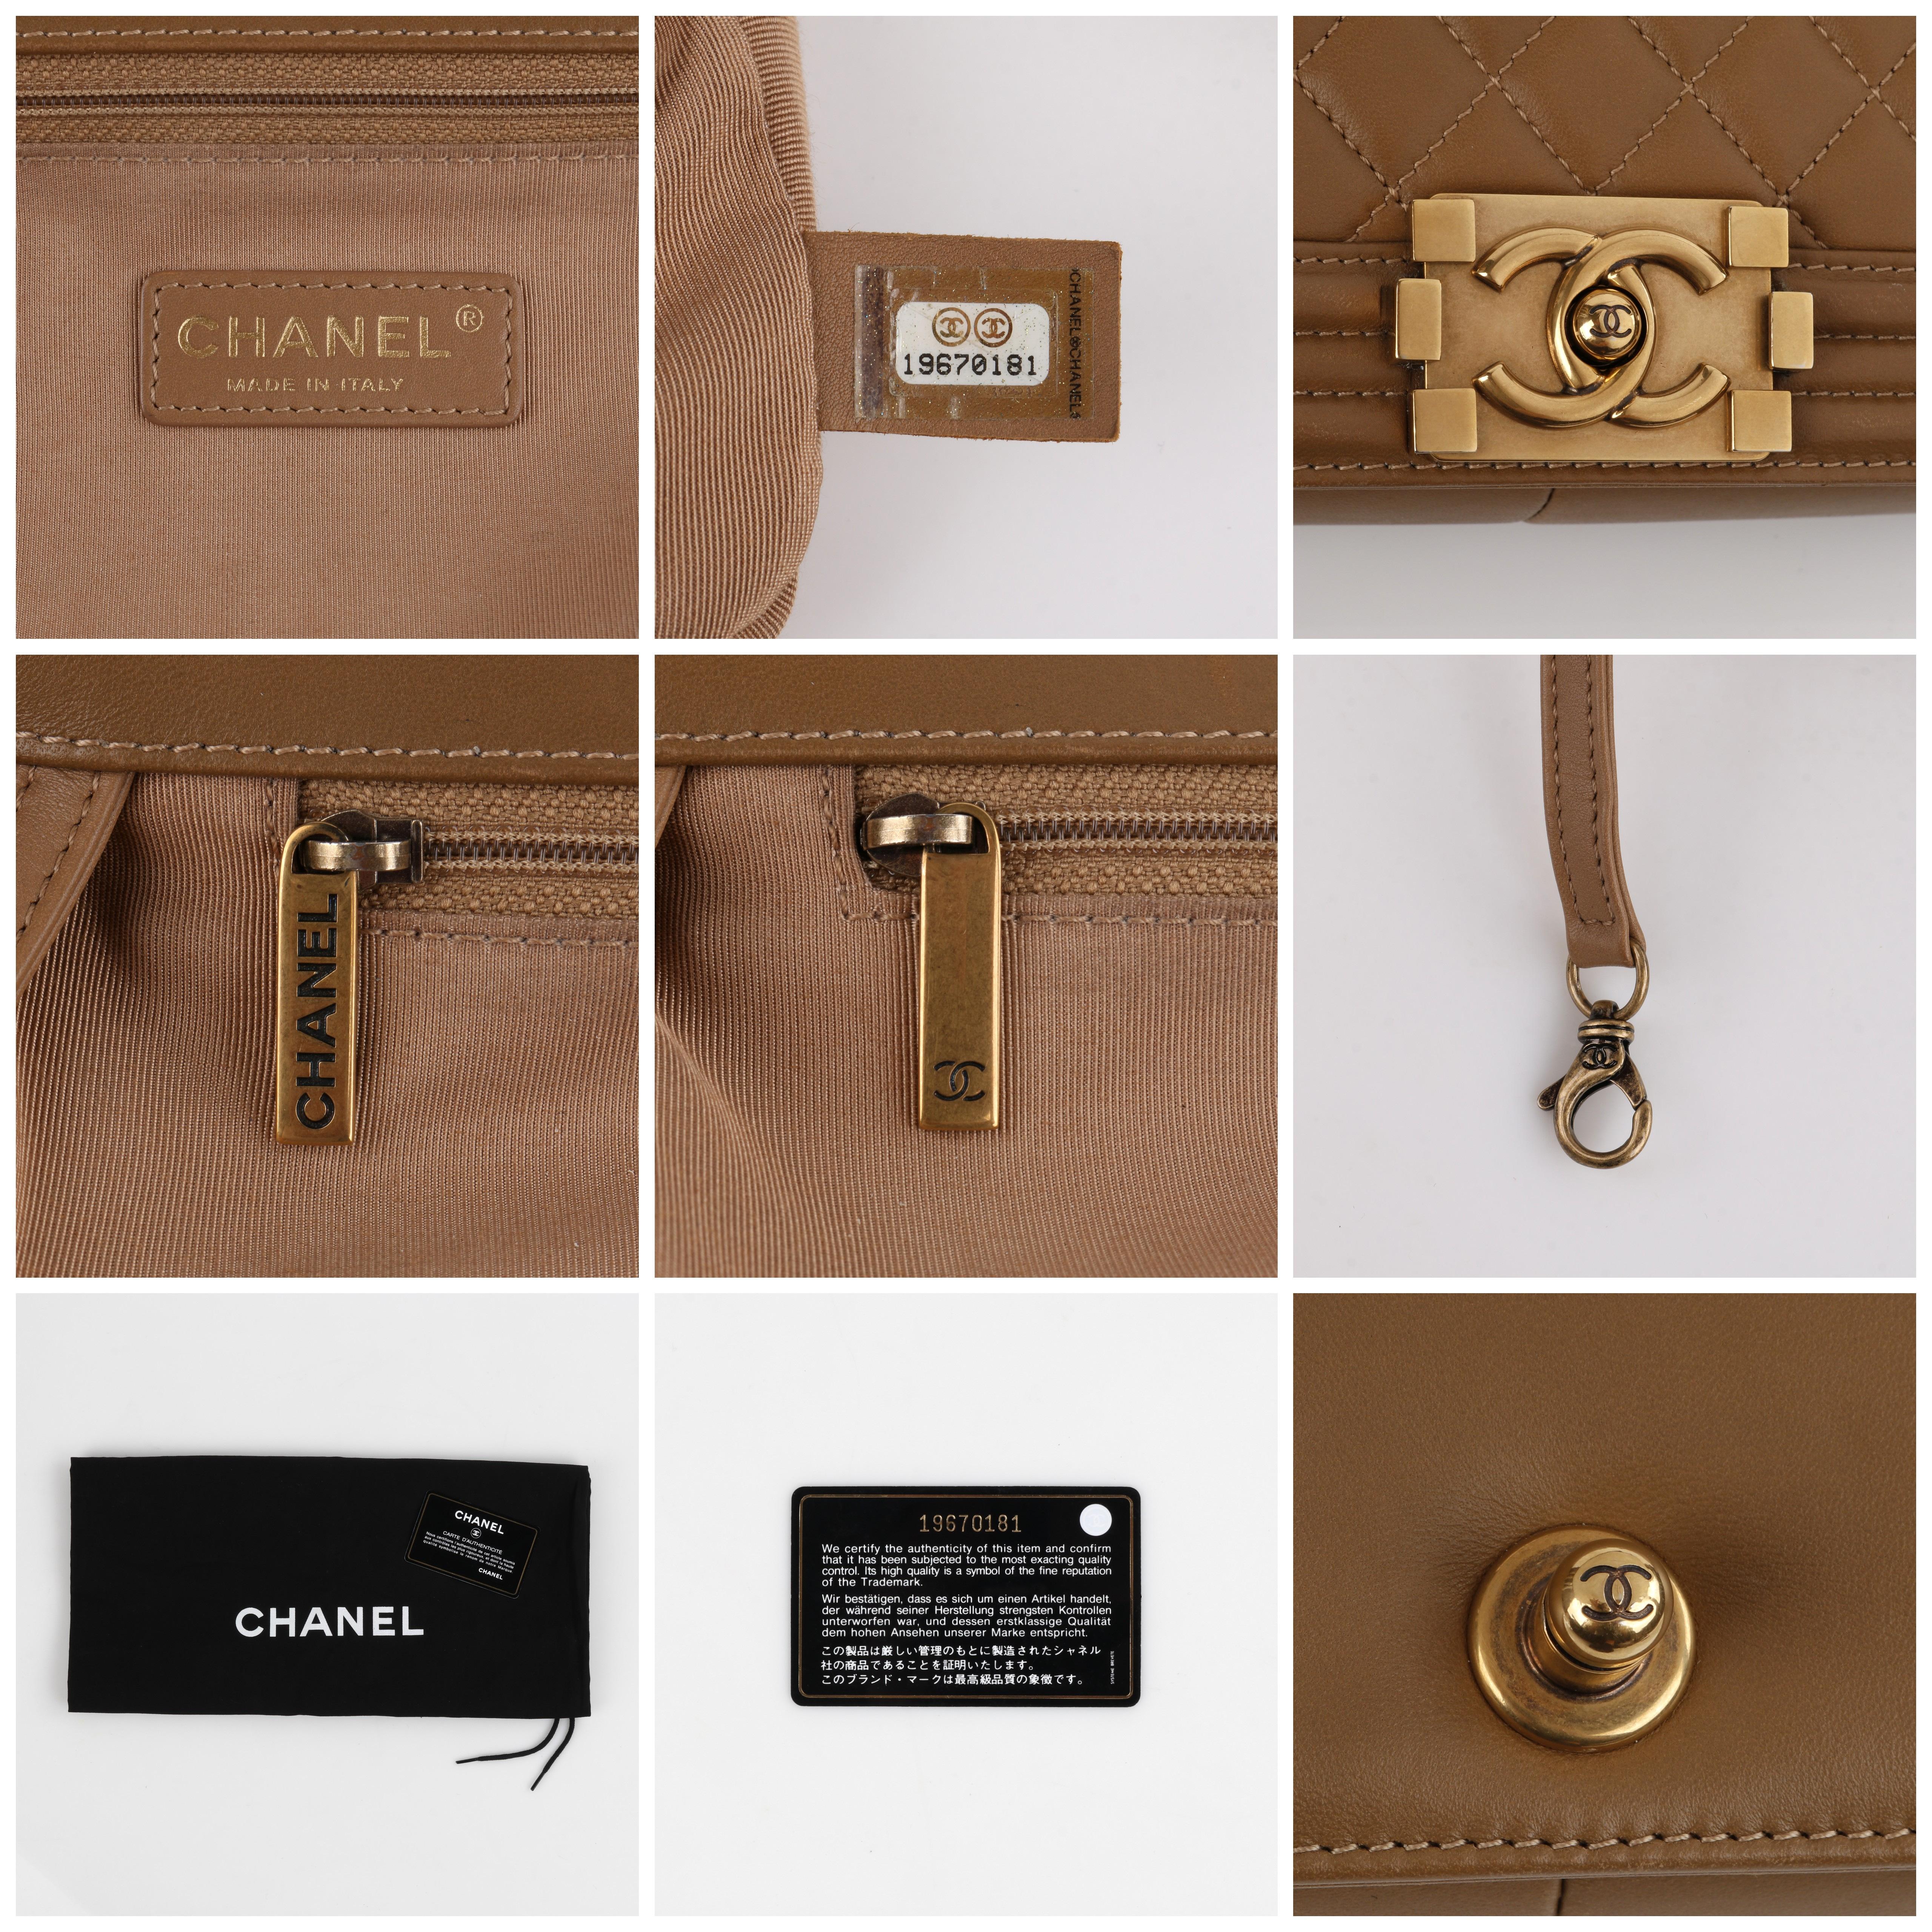 CHANEL c.2014 “Boy” Tan Quilted Leather Gold Hardware Cross-body Shoulder Bag 5